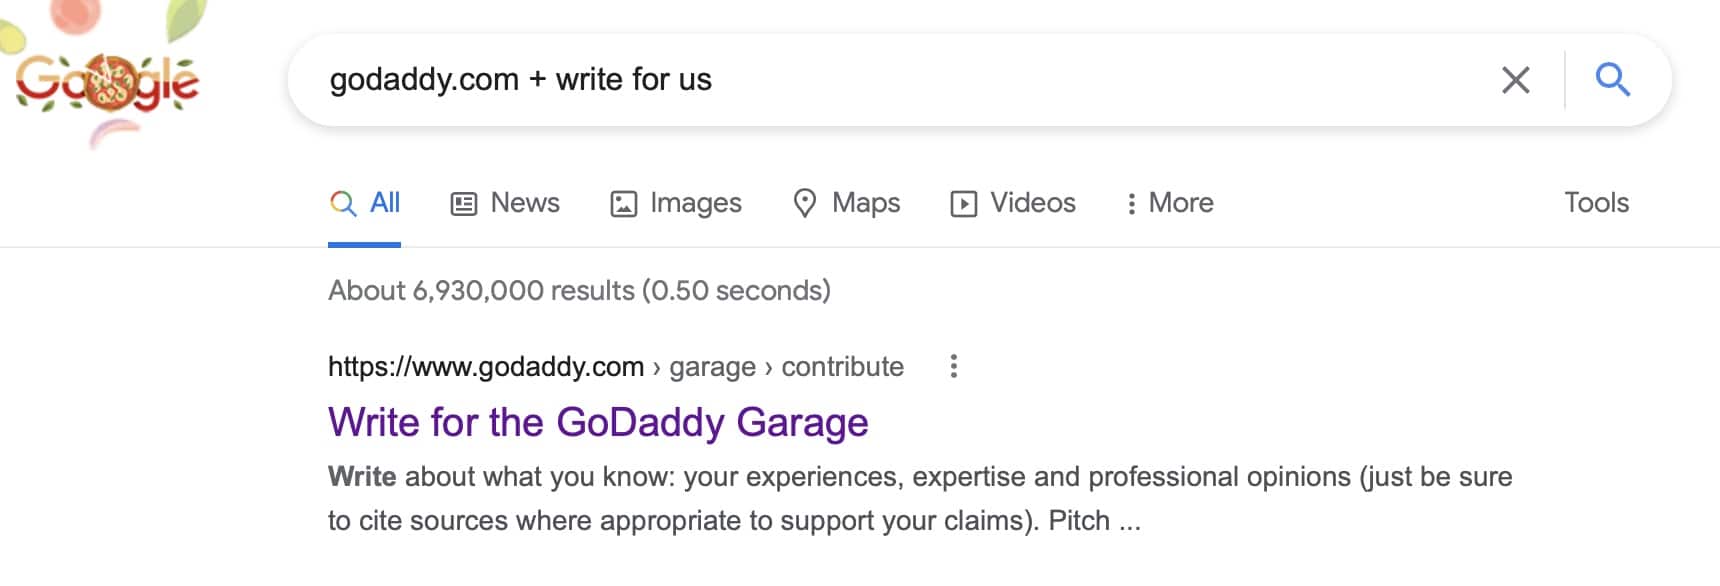 Image showing a Google Search with the text "Godaddy.com + write for us" 